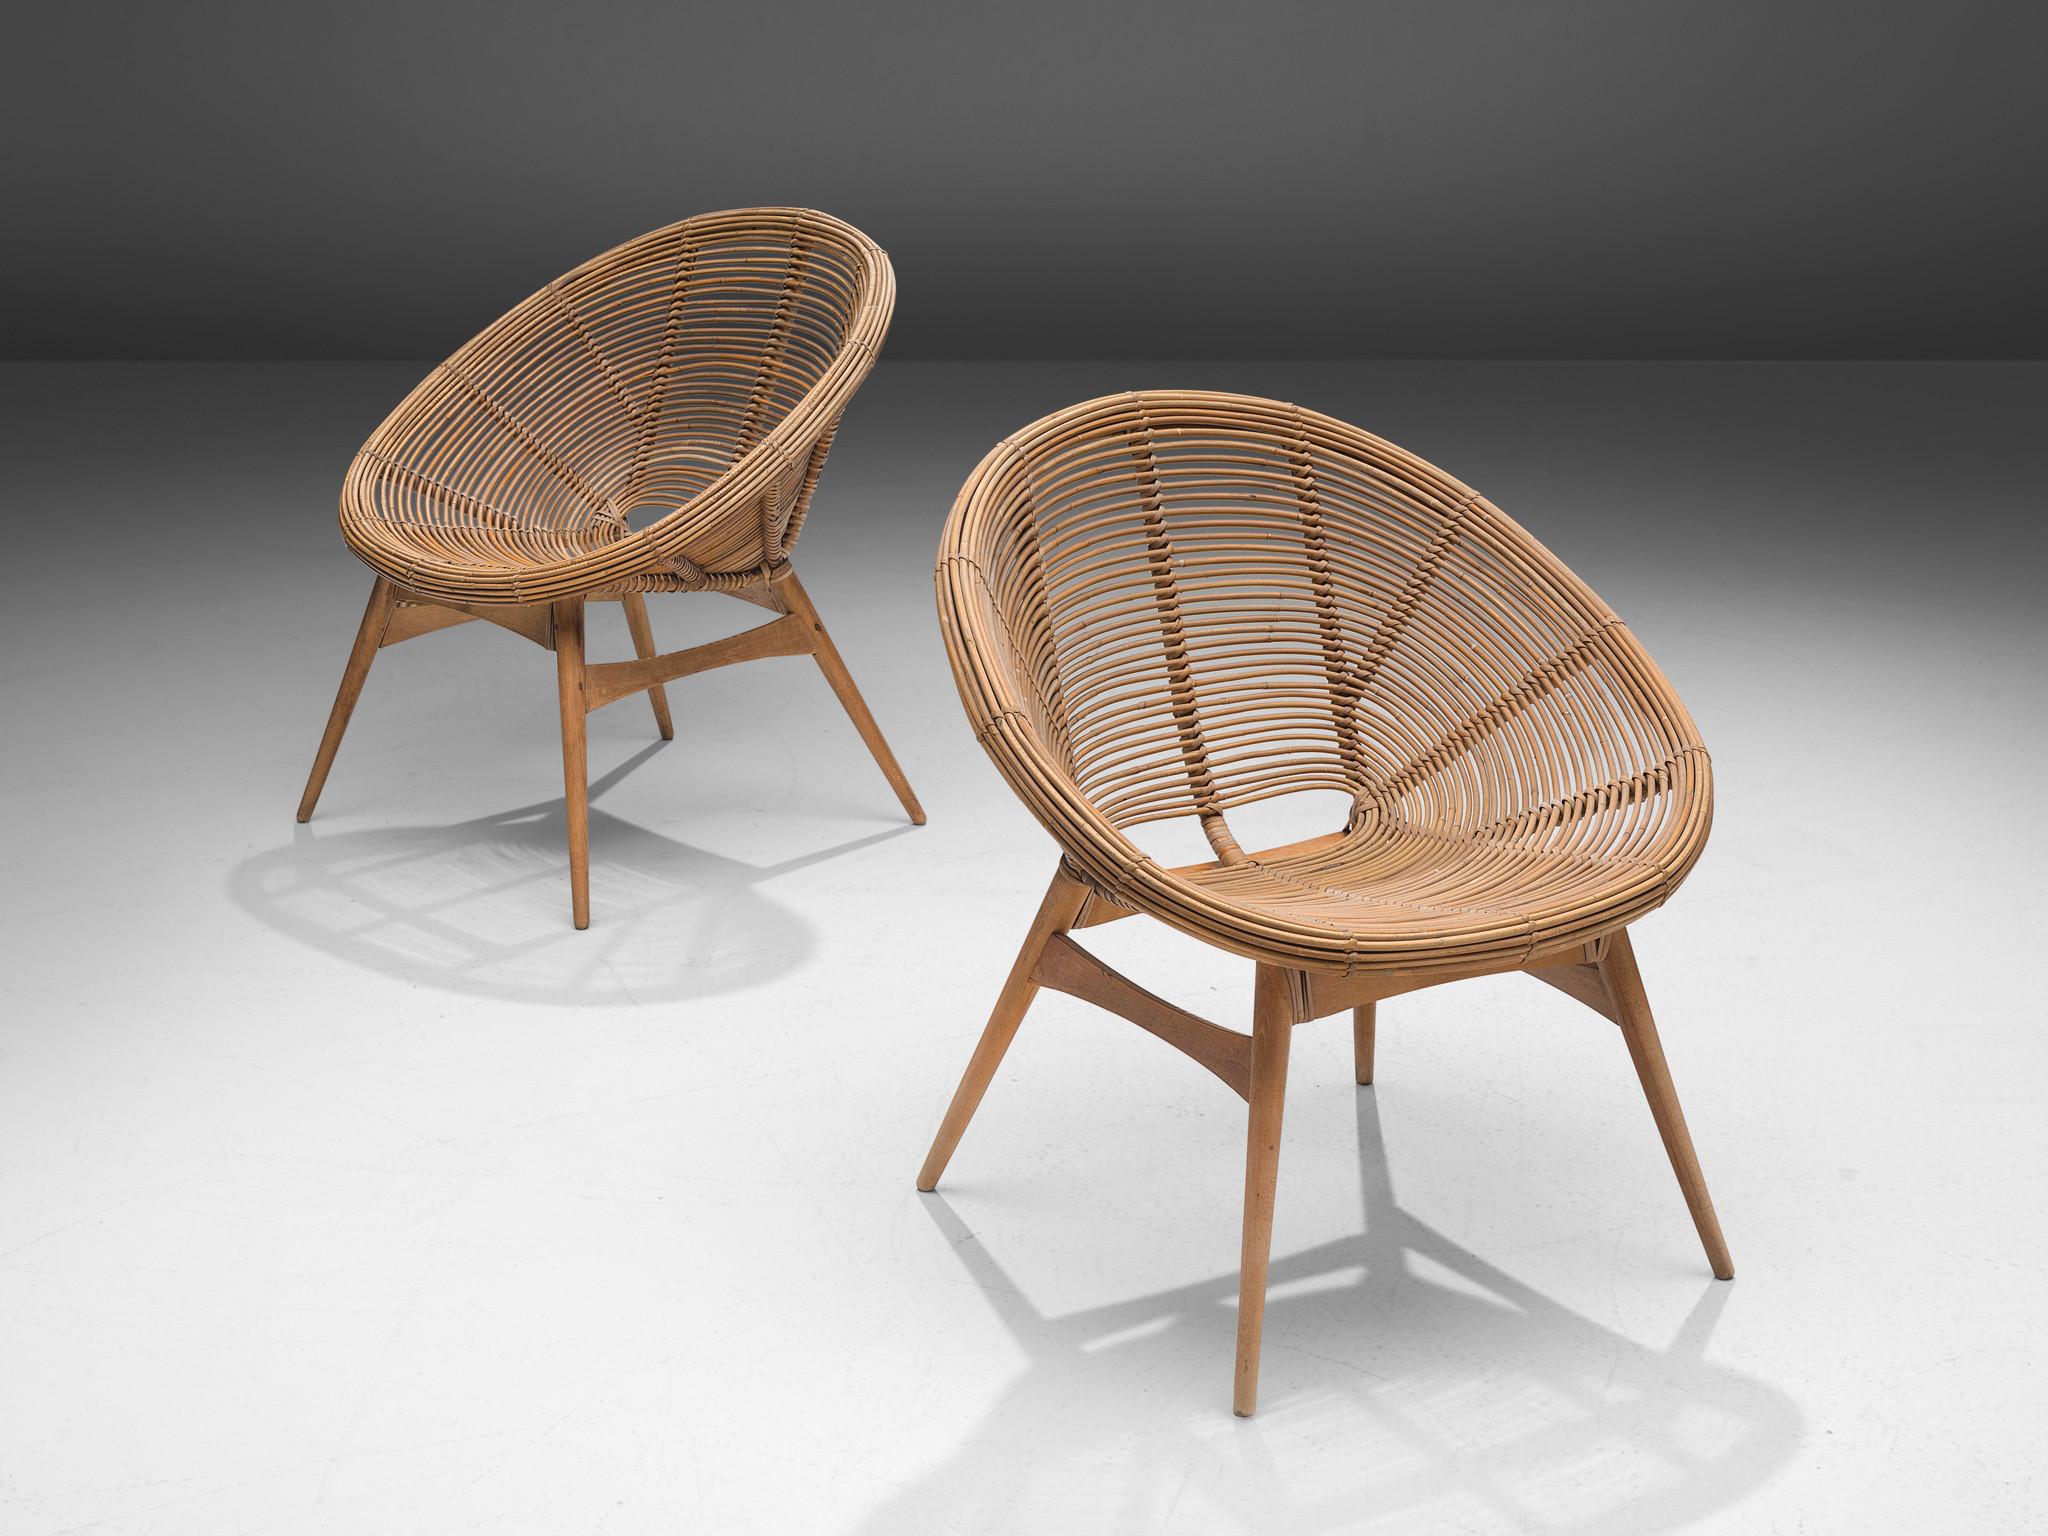 Lounge chairs, bamboo, wood, Europe, 1960s

Lovely pair of lounge chairs with an organic appeal characterized by an open, basket-shaped seat executed in woven bamboo. The minimal looking base is comprised of round, contoured tapered feet in wood.